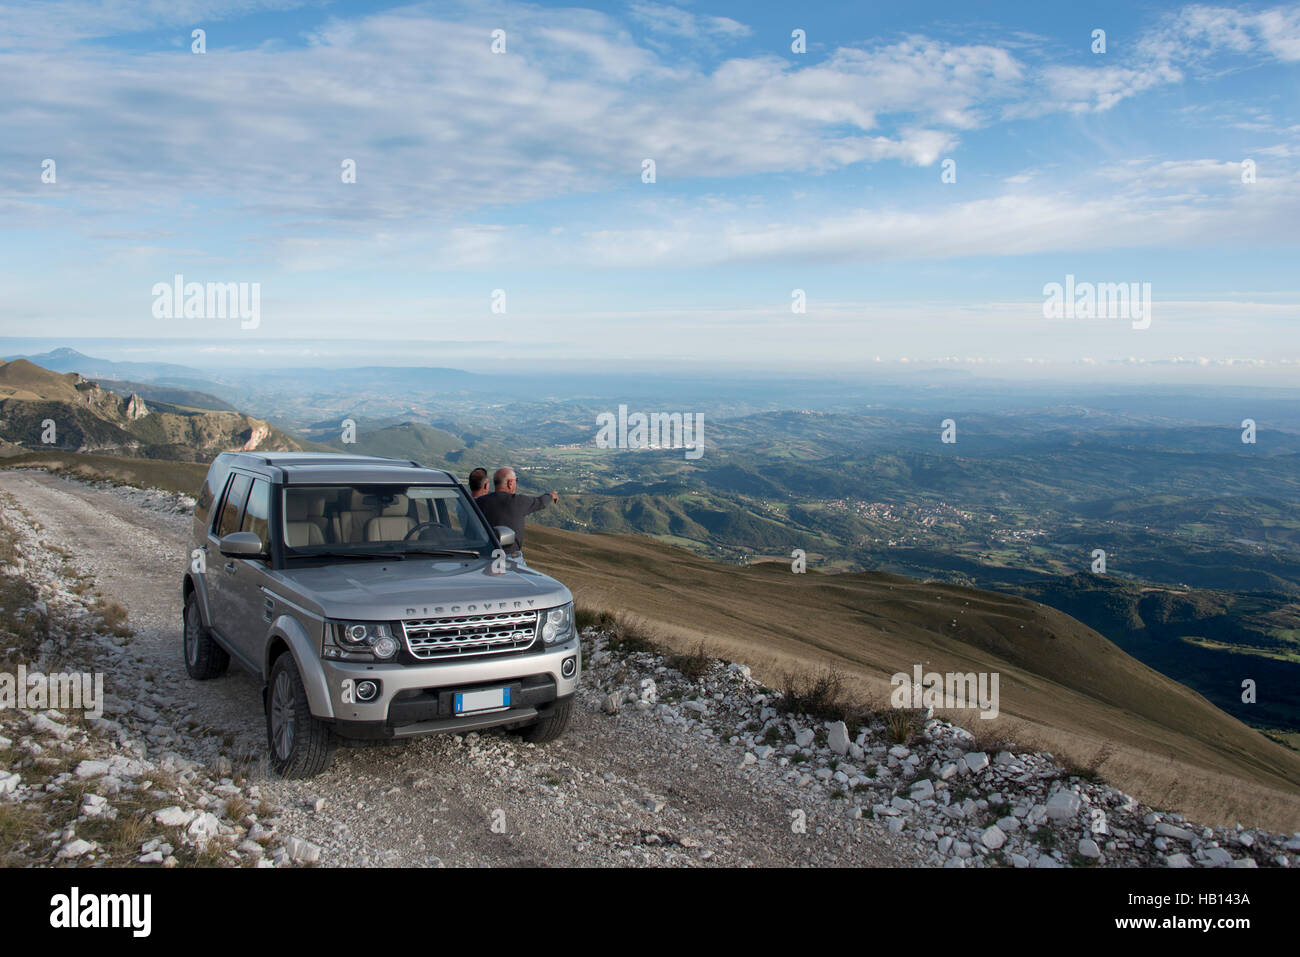 Two men stood next to a new Land Rover Discovery 4 looking out over the Marche landscape in Italy Stock Photo